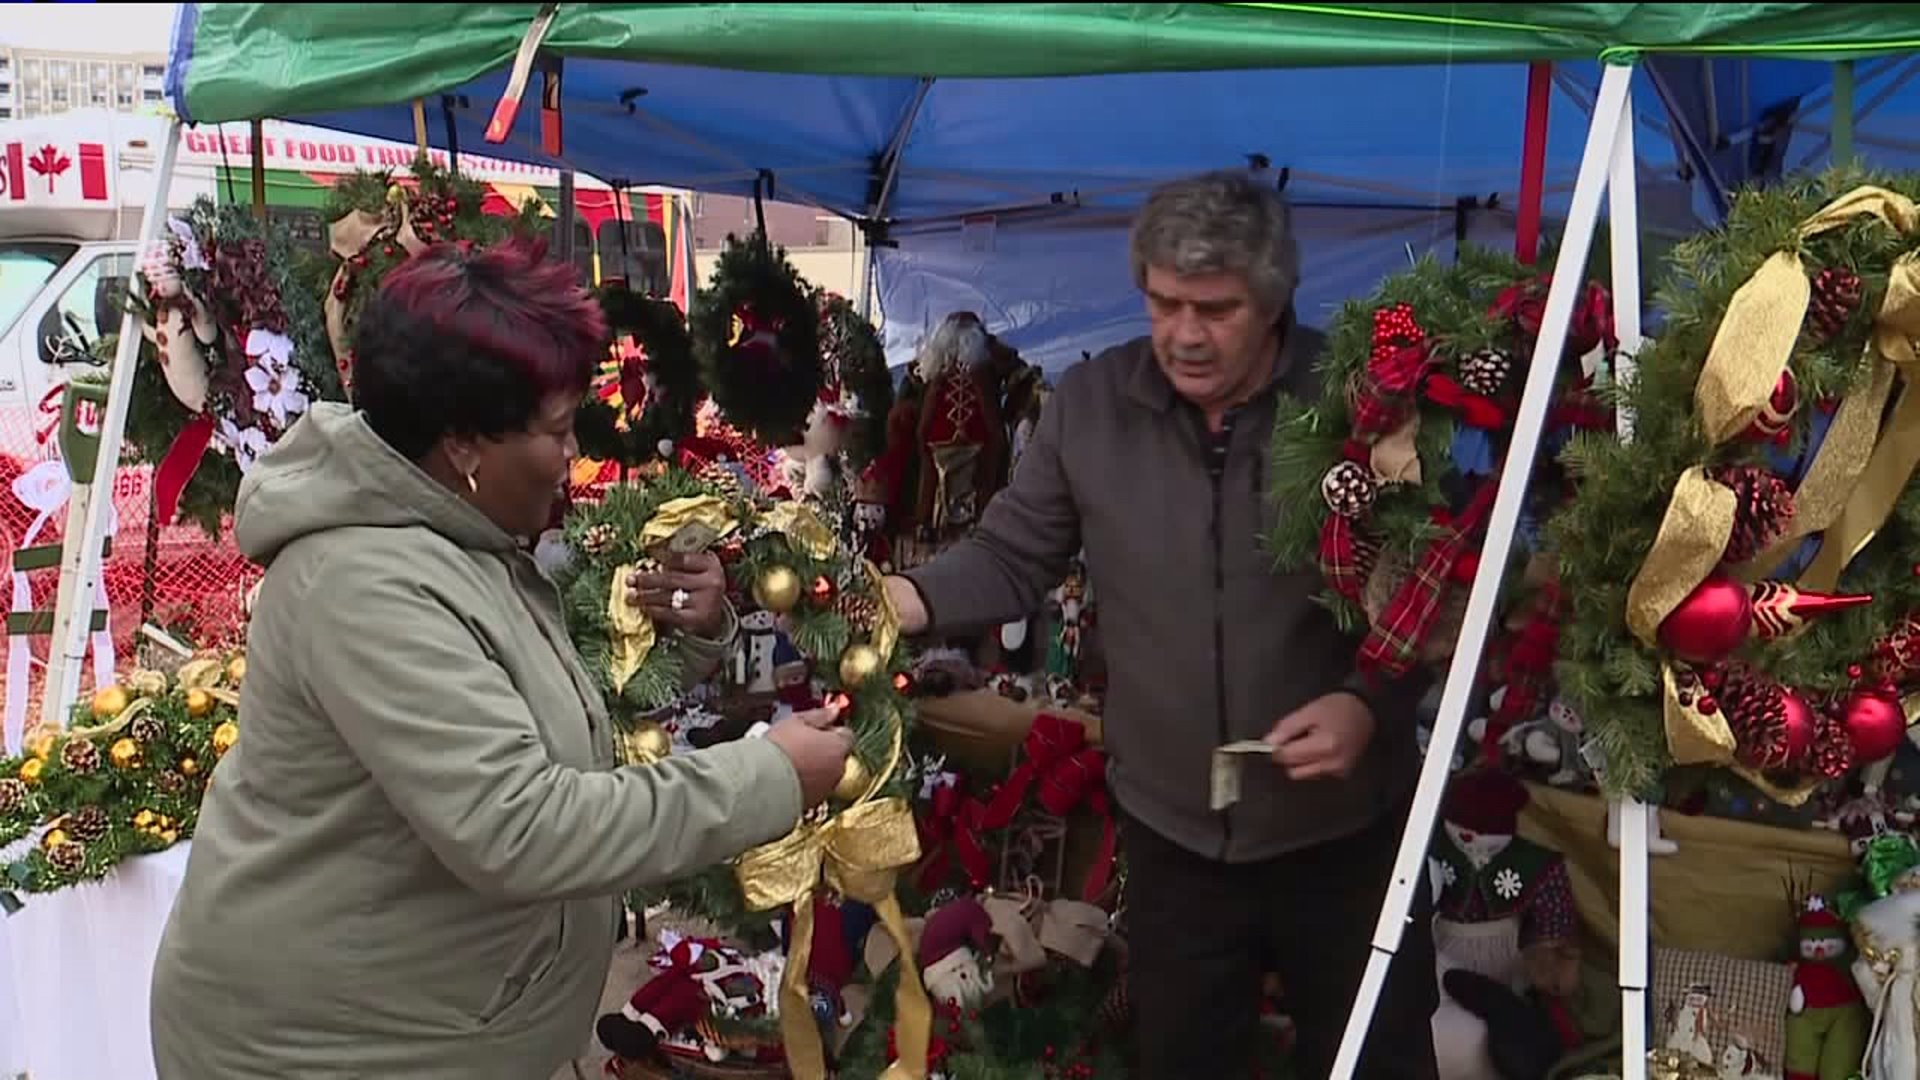 Wilkes-Barre`s Third Annual Old Fashioned Holiday Market